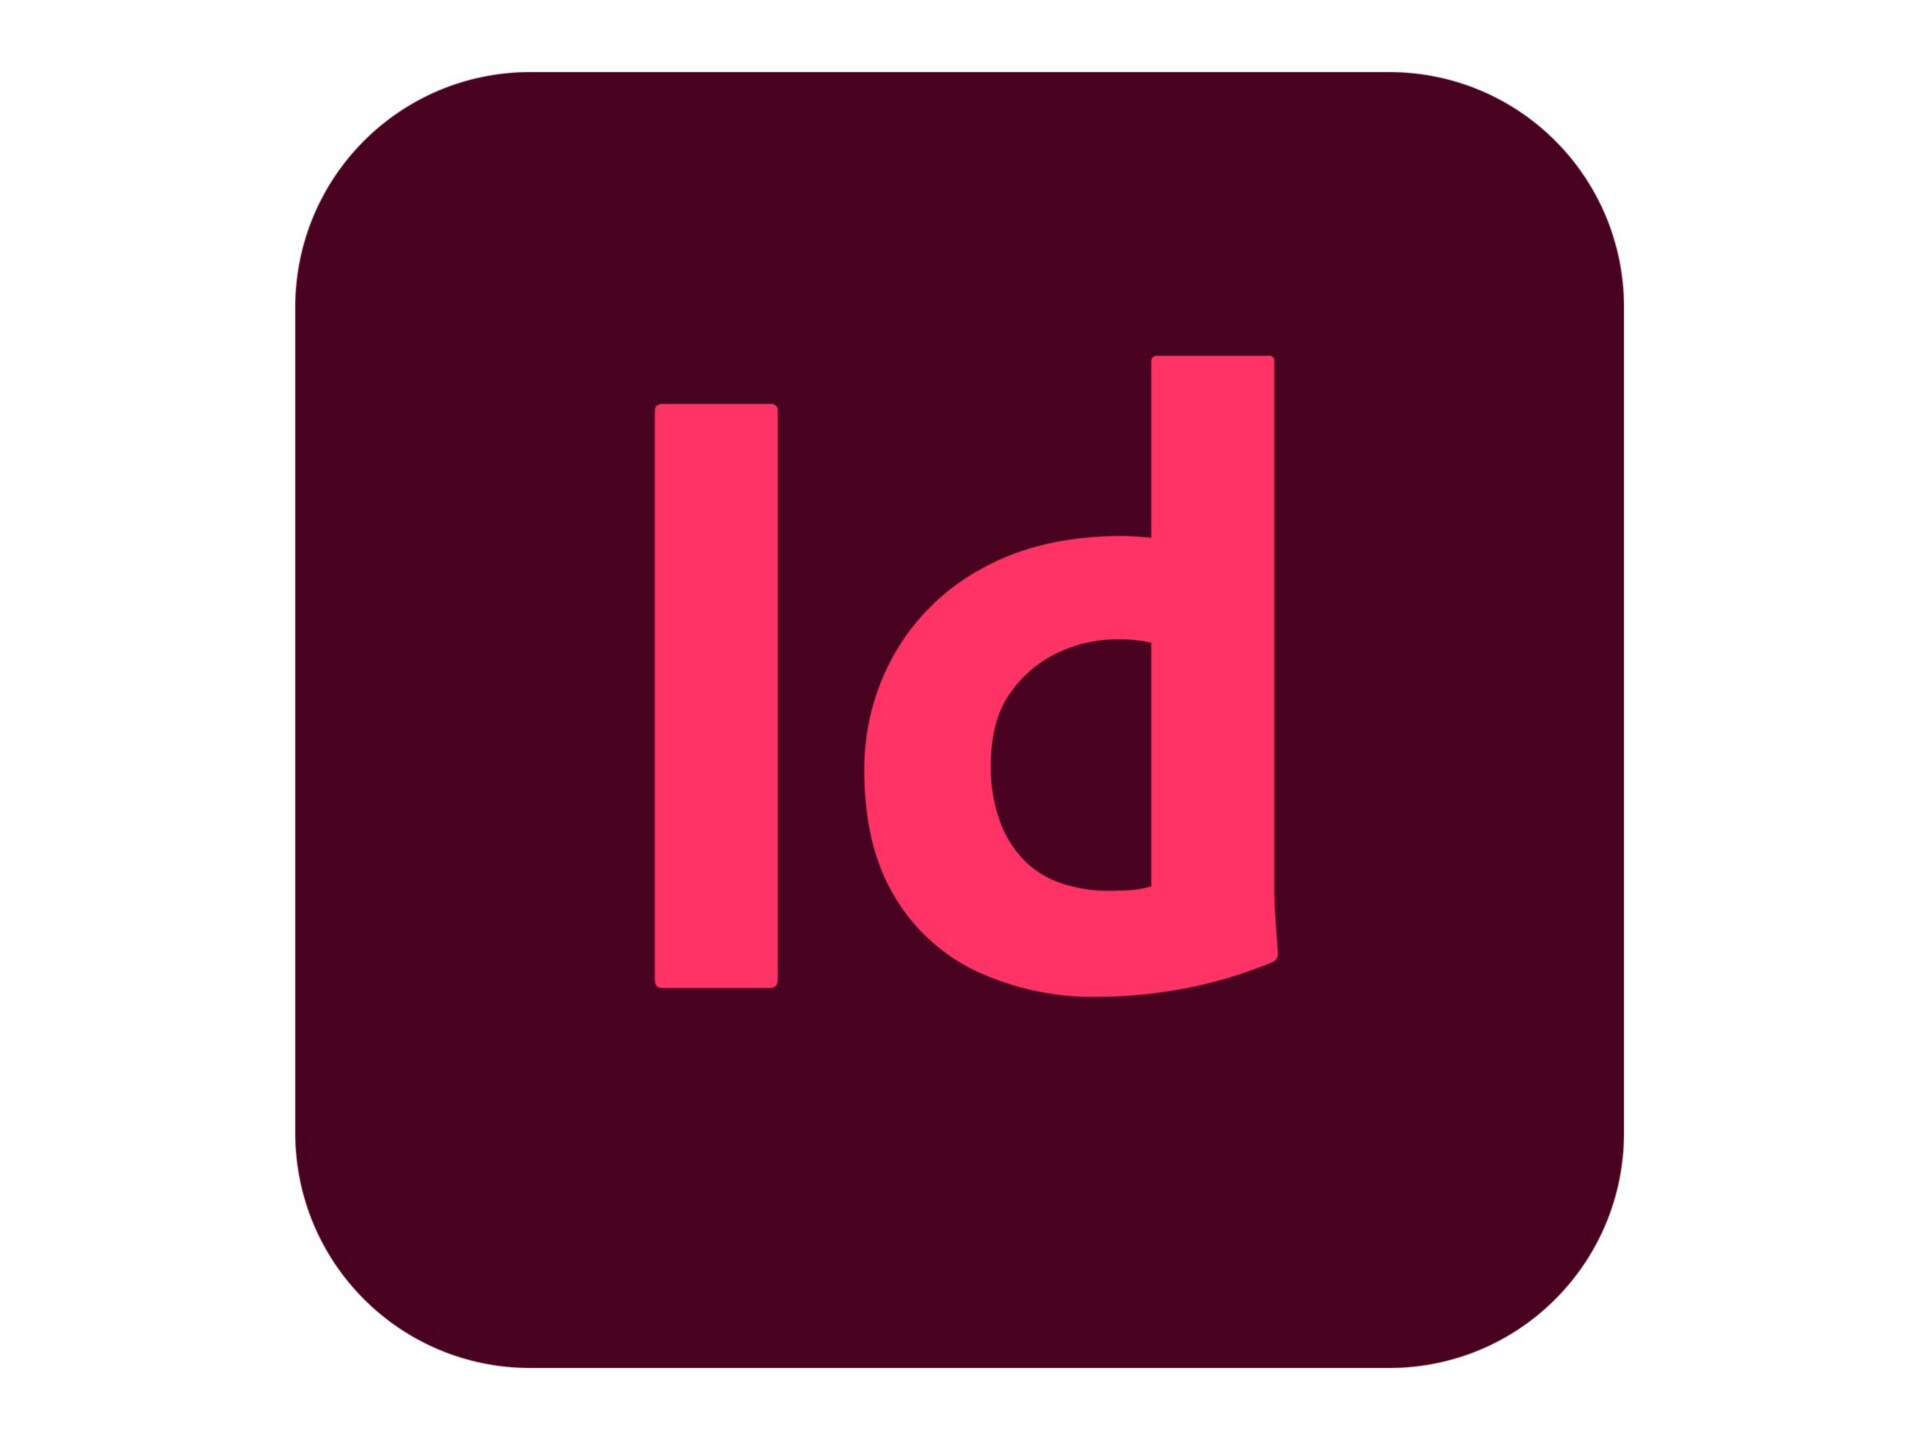 Adobe InDesign CC for teams - Subscription New (20 months) - 1 named user